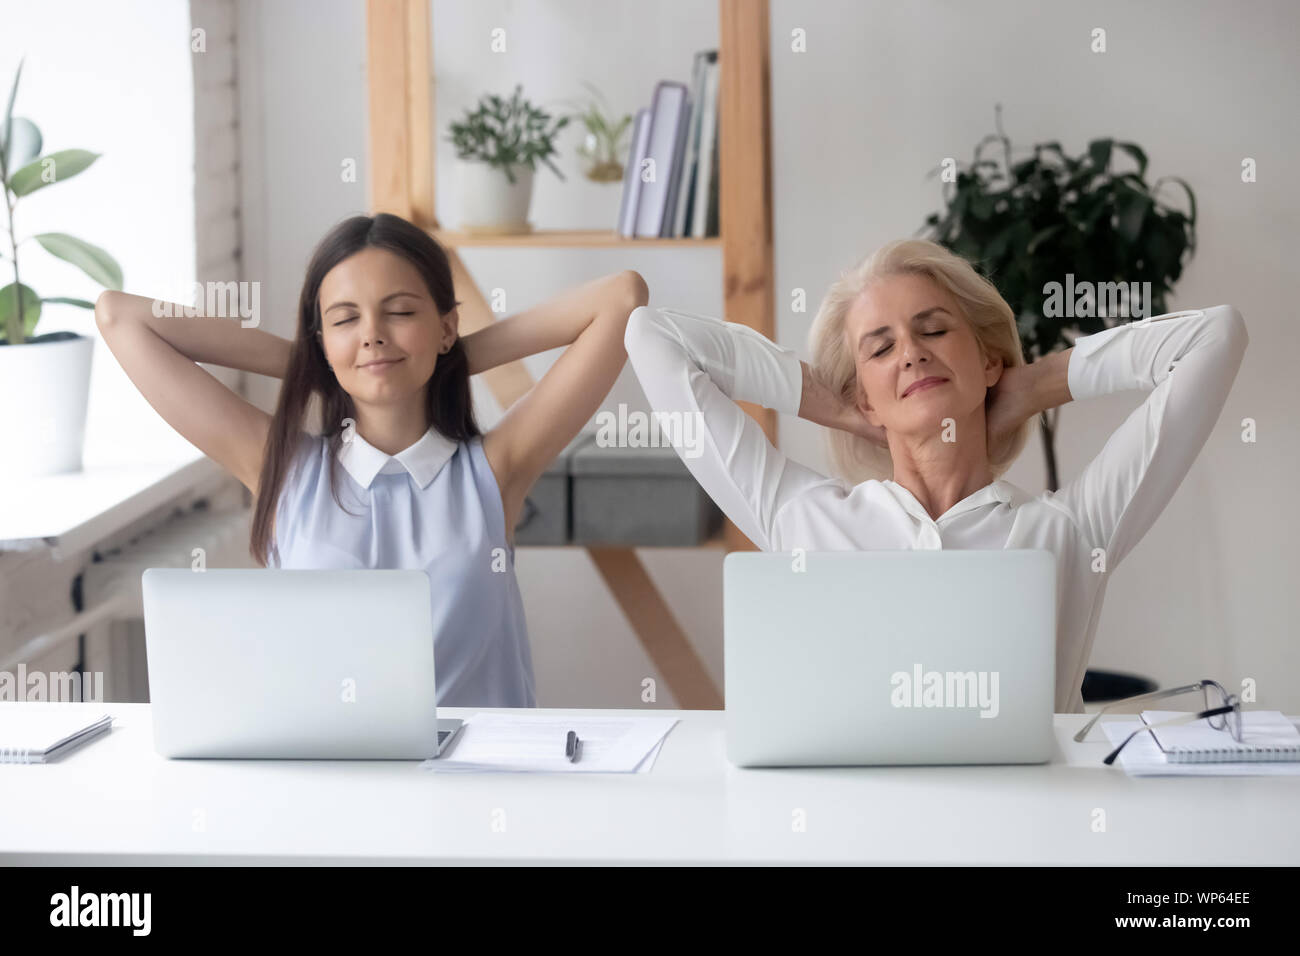 Female employees have break relaxing at workplace dreaming Stock Photo